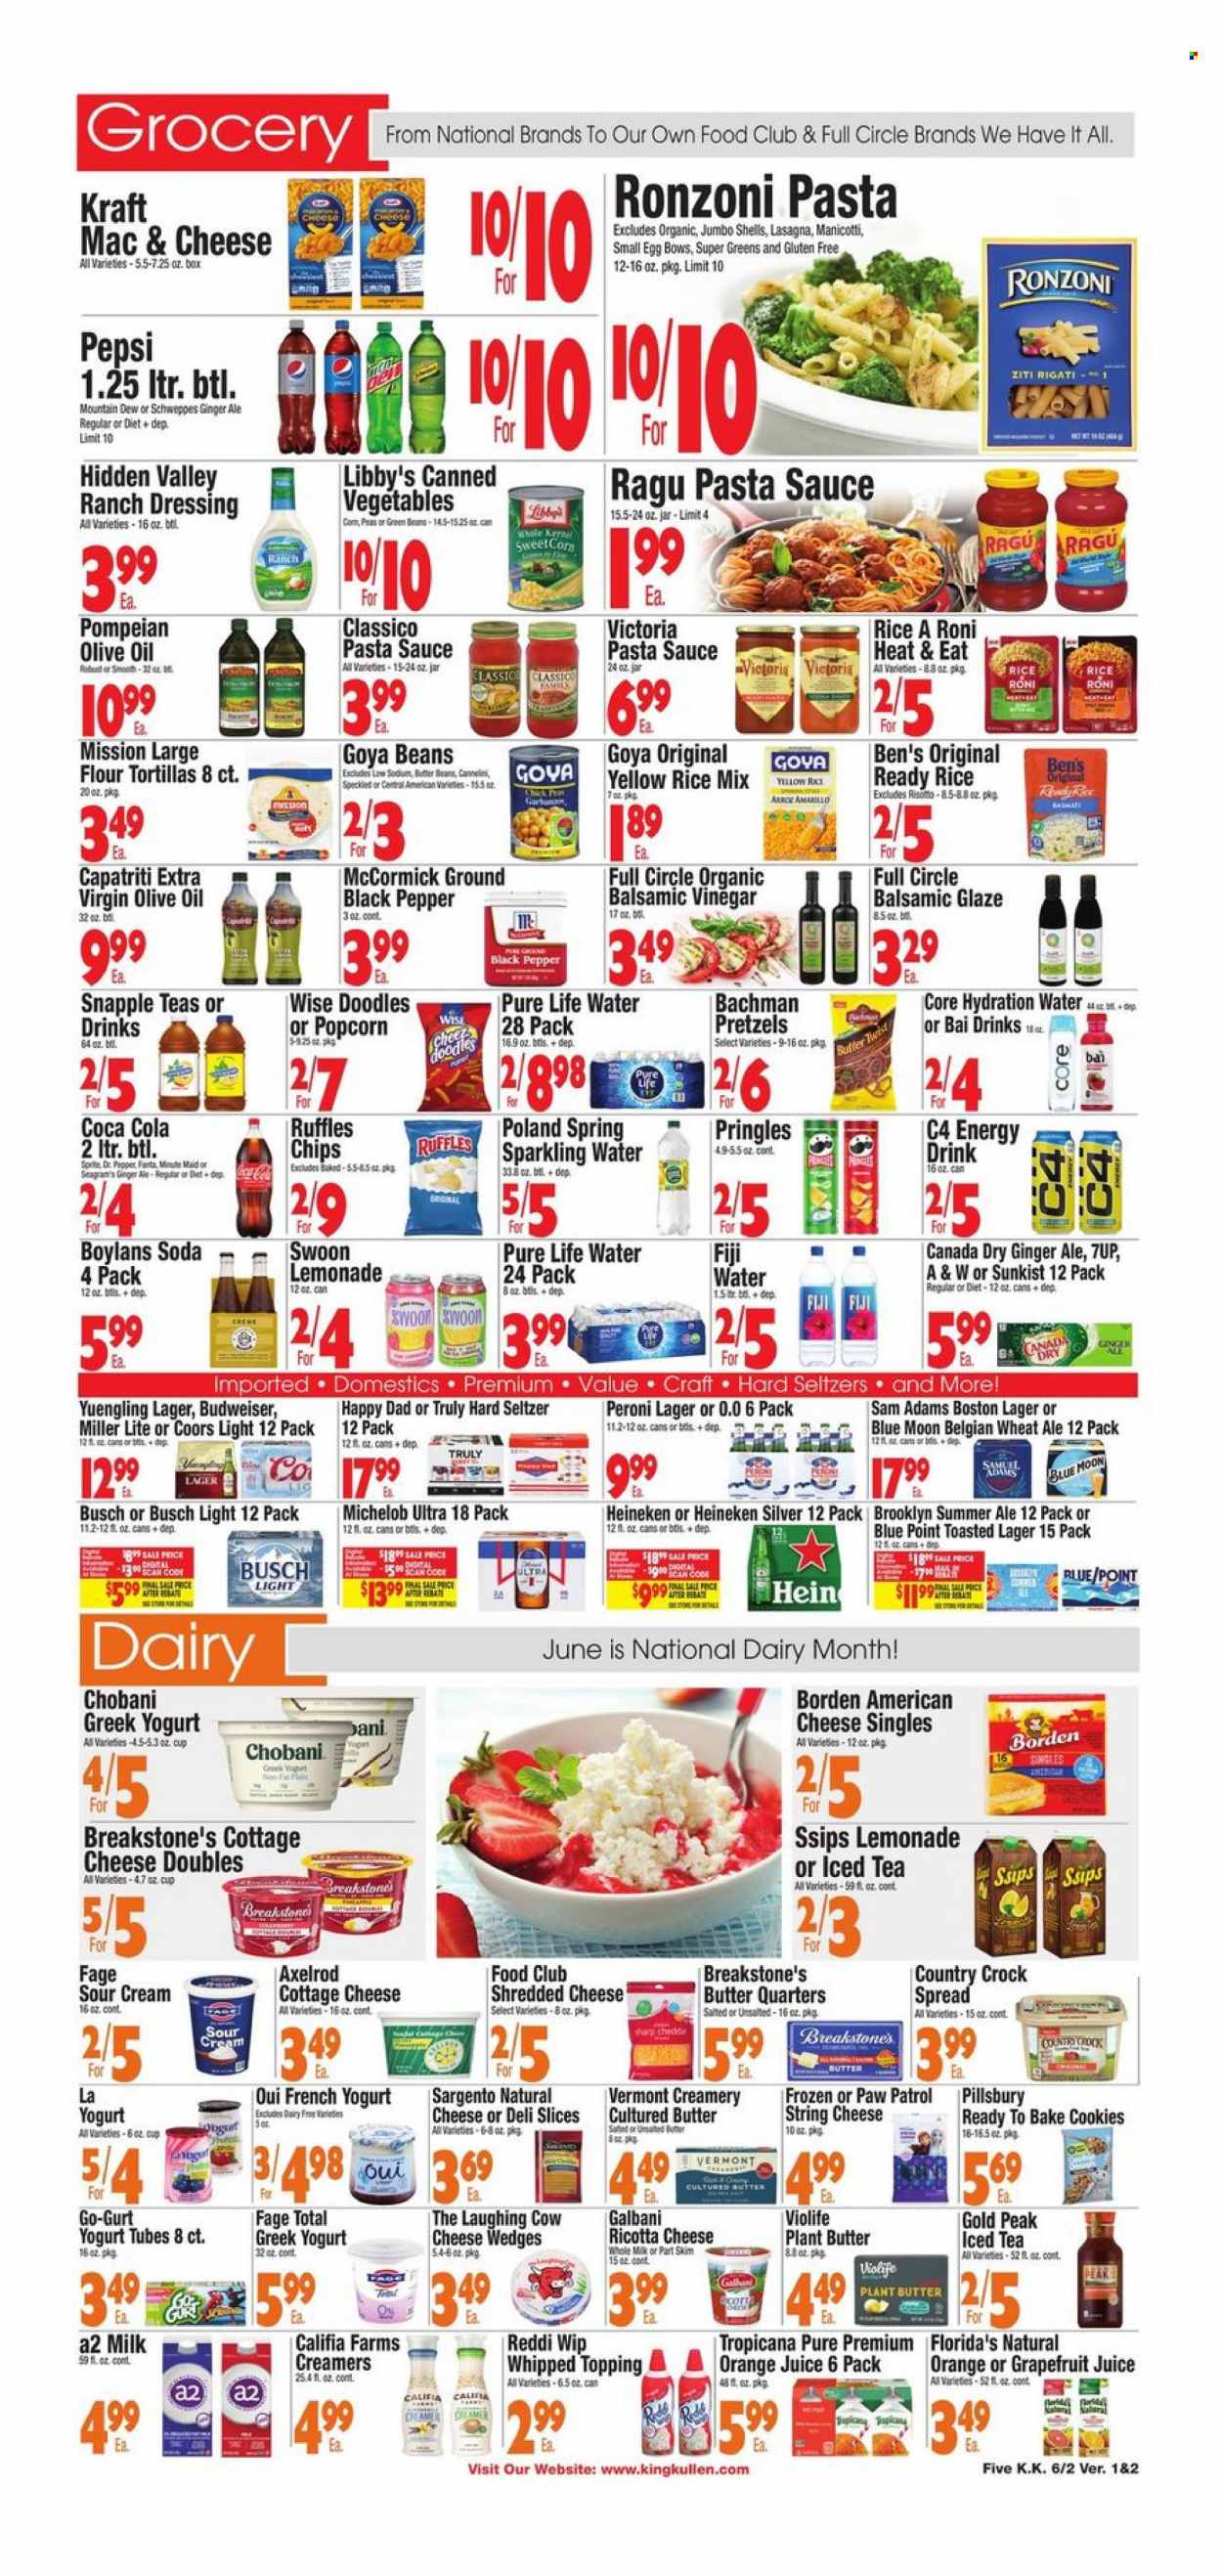 thumbnail - King Kullen Flyer - 06/02/2023 - 06/08/2023 - Sales products - tortillas, pretzels, flour tortillas, beans, corn, green beans, peas, sweet corn, risotto, pasta sauce, sauce, Pillsbury, lasagna meal, Kraft®, ragú pasta, american cheese, cottage cheese, ricotta, shredded cheese, string cheese, The Laughing Cow, Galbani, Sargento, greek yoghurt, yoghurt, Chobani, milk, eggs, margarine, sour cream, ranch dressing, cookies, Paw Patrol, Florida's Natural, Pringles, popcorn, Ruffles, salty snack, topping, canned vegetables, Goya, balsamic glaze, dressing, ragu, Classico, balsamic vinegar, extra virgin olive oil, olive oil, oil, Canada Dry, Coca-Cola, ginger ale, lemonade, Mountain Dew, Schweppes, Sprite, Pepsi, orange juice, juice, Fanta, energy drink, ice tea, Dr. Pepper, soft drink, 7UP, Snapple, Bai, fruit punch, soda, sparkling water, Pure Life Water, water, Hard Seltzer, TRULY, beer, Busch, Heineken, Peroni, Lager, Scott, Budweiser, Miller Lite, Coors, Blue Moon, Yuengling, Michelob. Page 5.